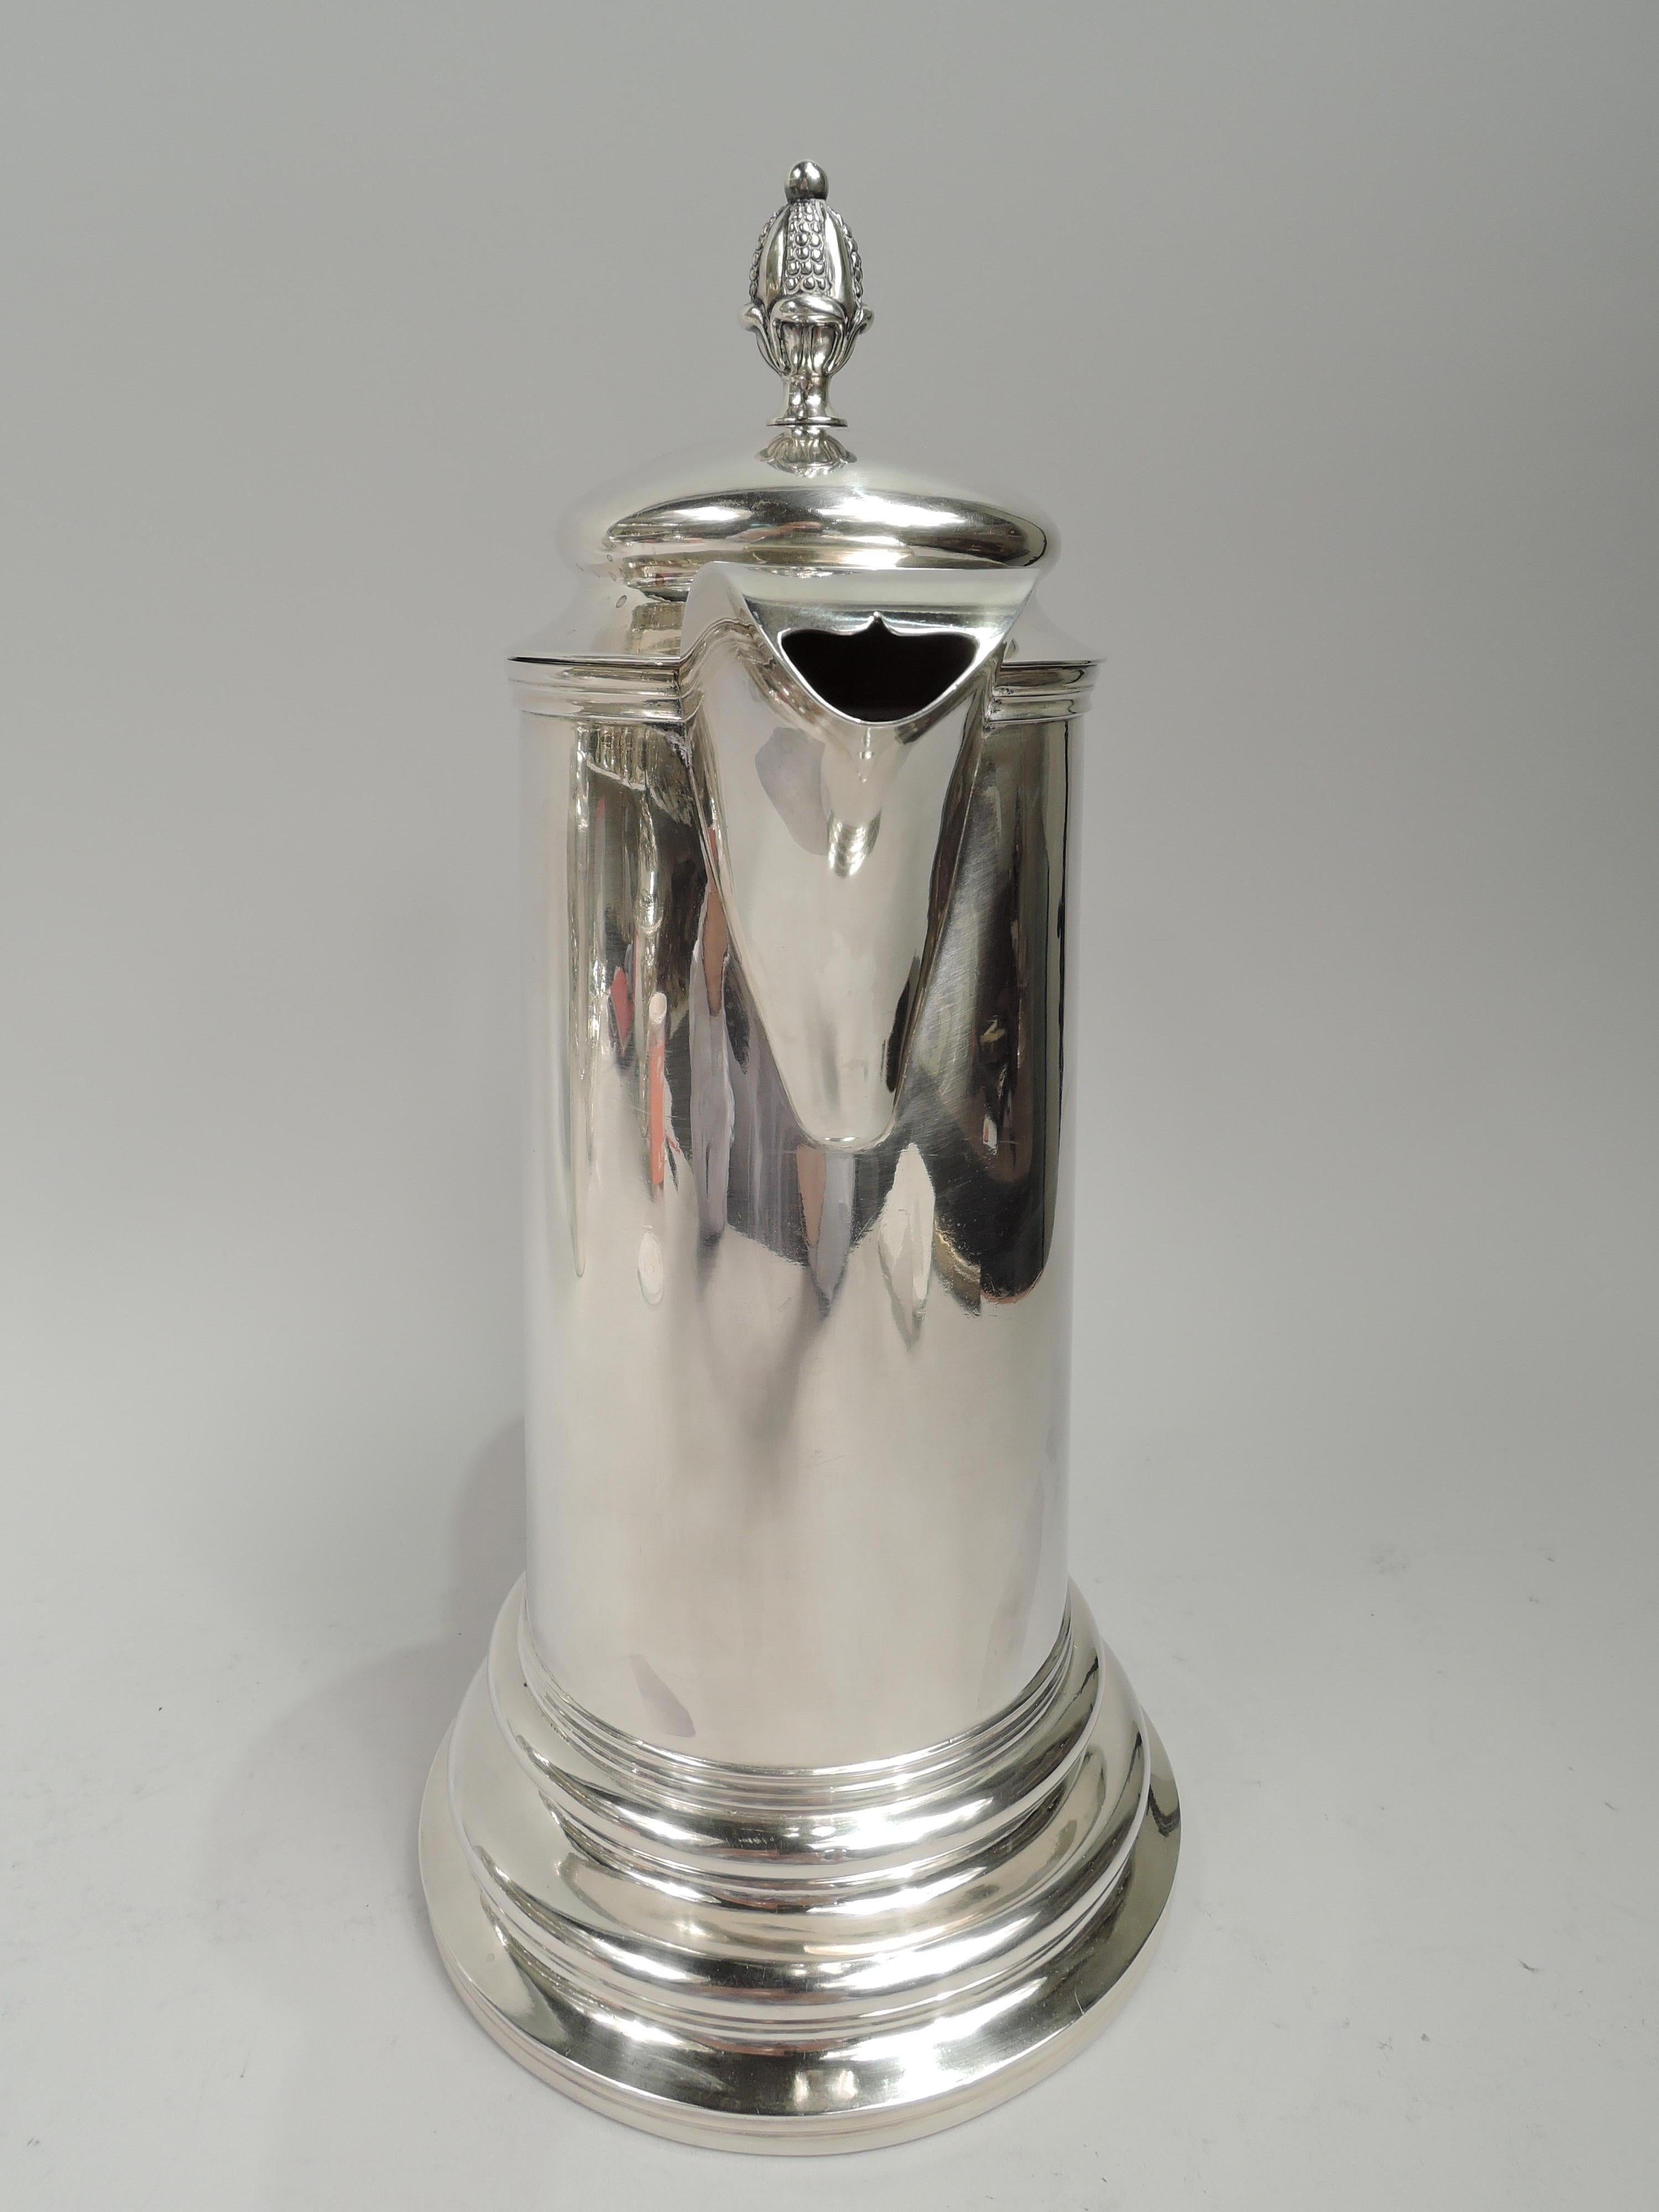 Federal classical coin silver flagon. Made by Nicholas James Bogert in New York, ca 1820. Upward tapering cylinder on spread and stepped base. S-scroll handle with ribbed thumb rest and heart terminal. Hinged and domed cover with bud finial. Curved